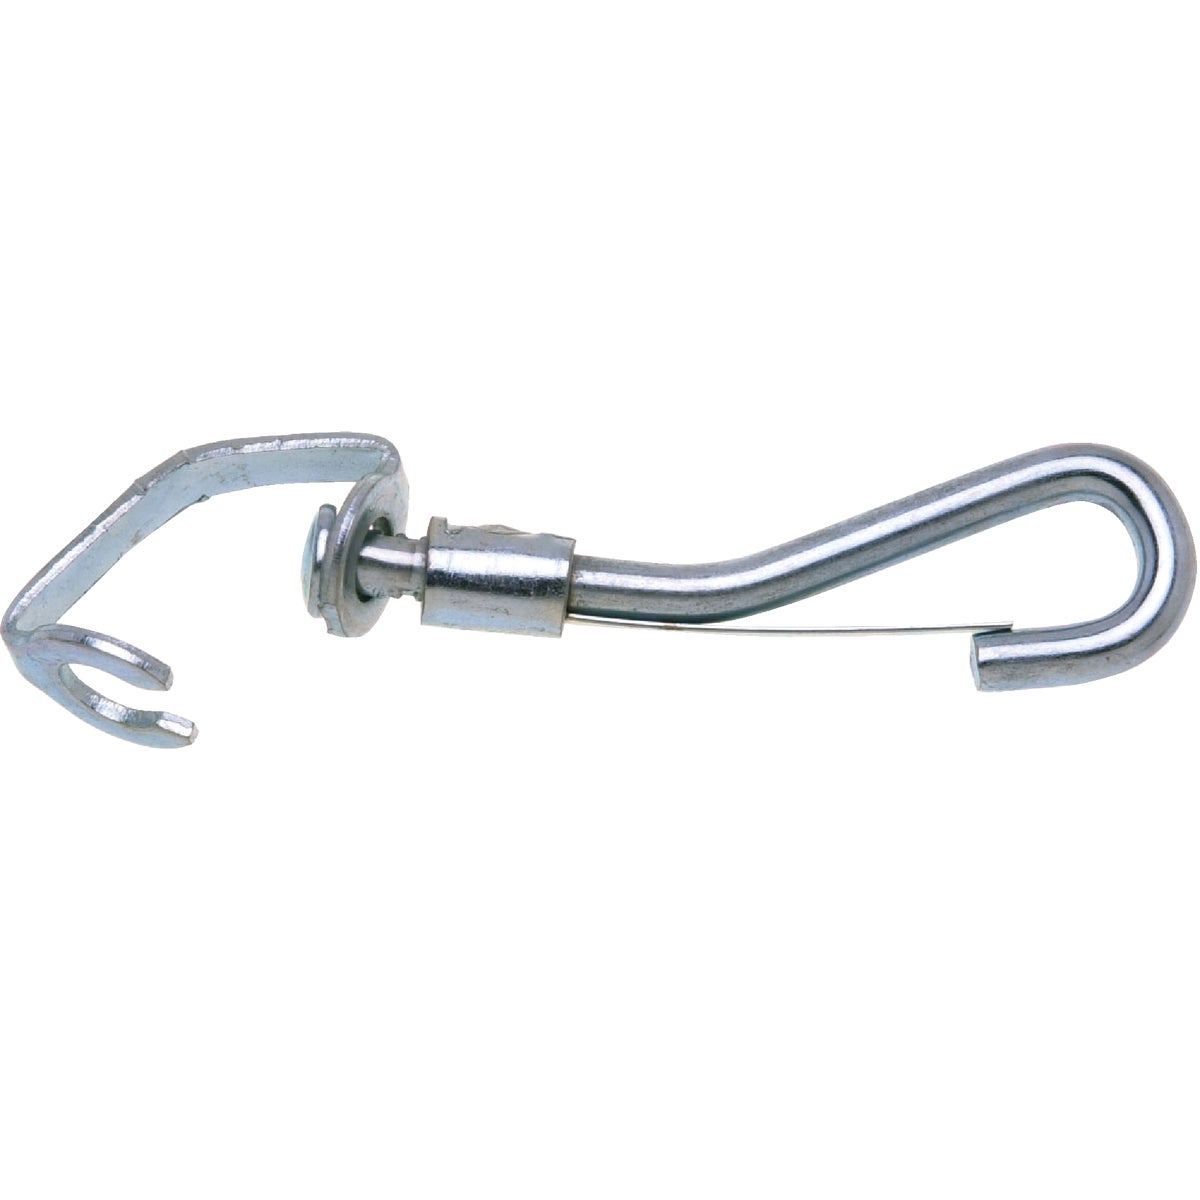 Item 743397, Open eye spring snap. Features a convenient swivel design. 3-3/4-inch.